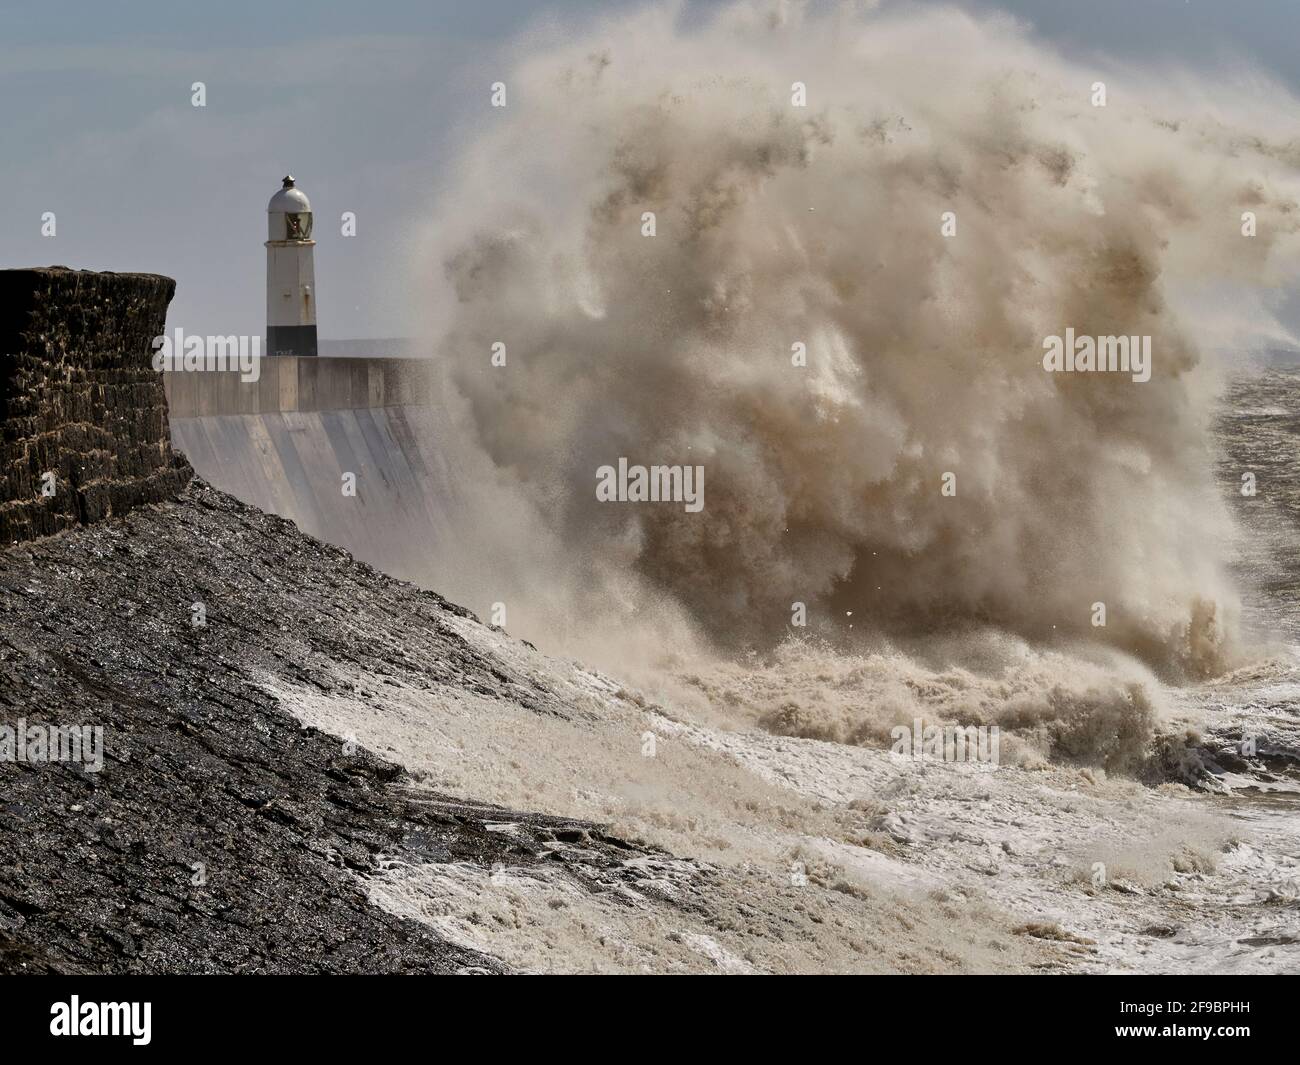 High waves during storm, Porthcawl lighthouse, South Wales, UK. Stock Photo